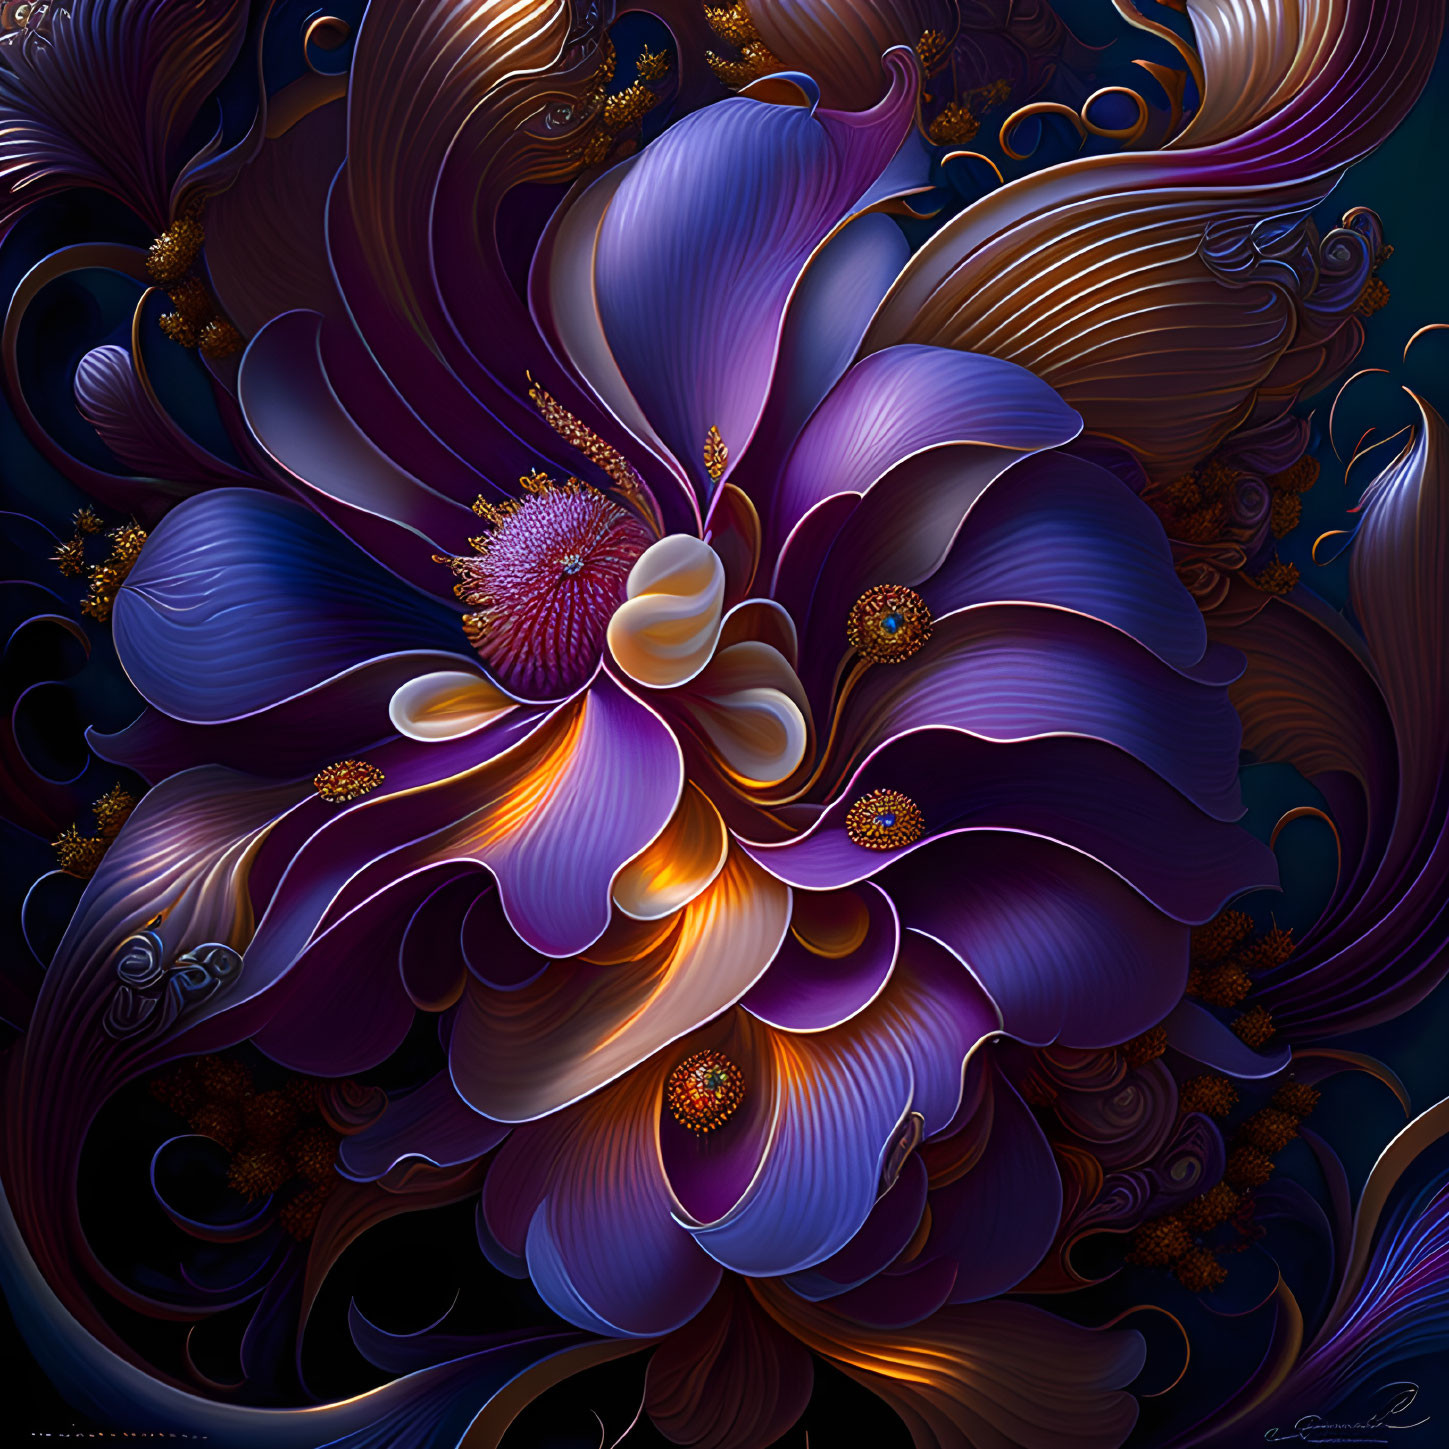 Intricate violet flower digital art with gold accents